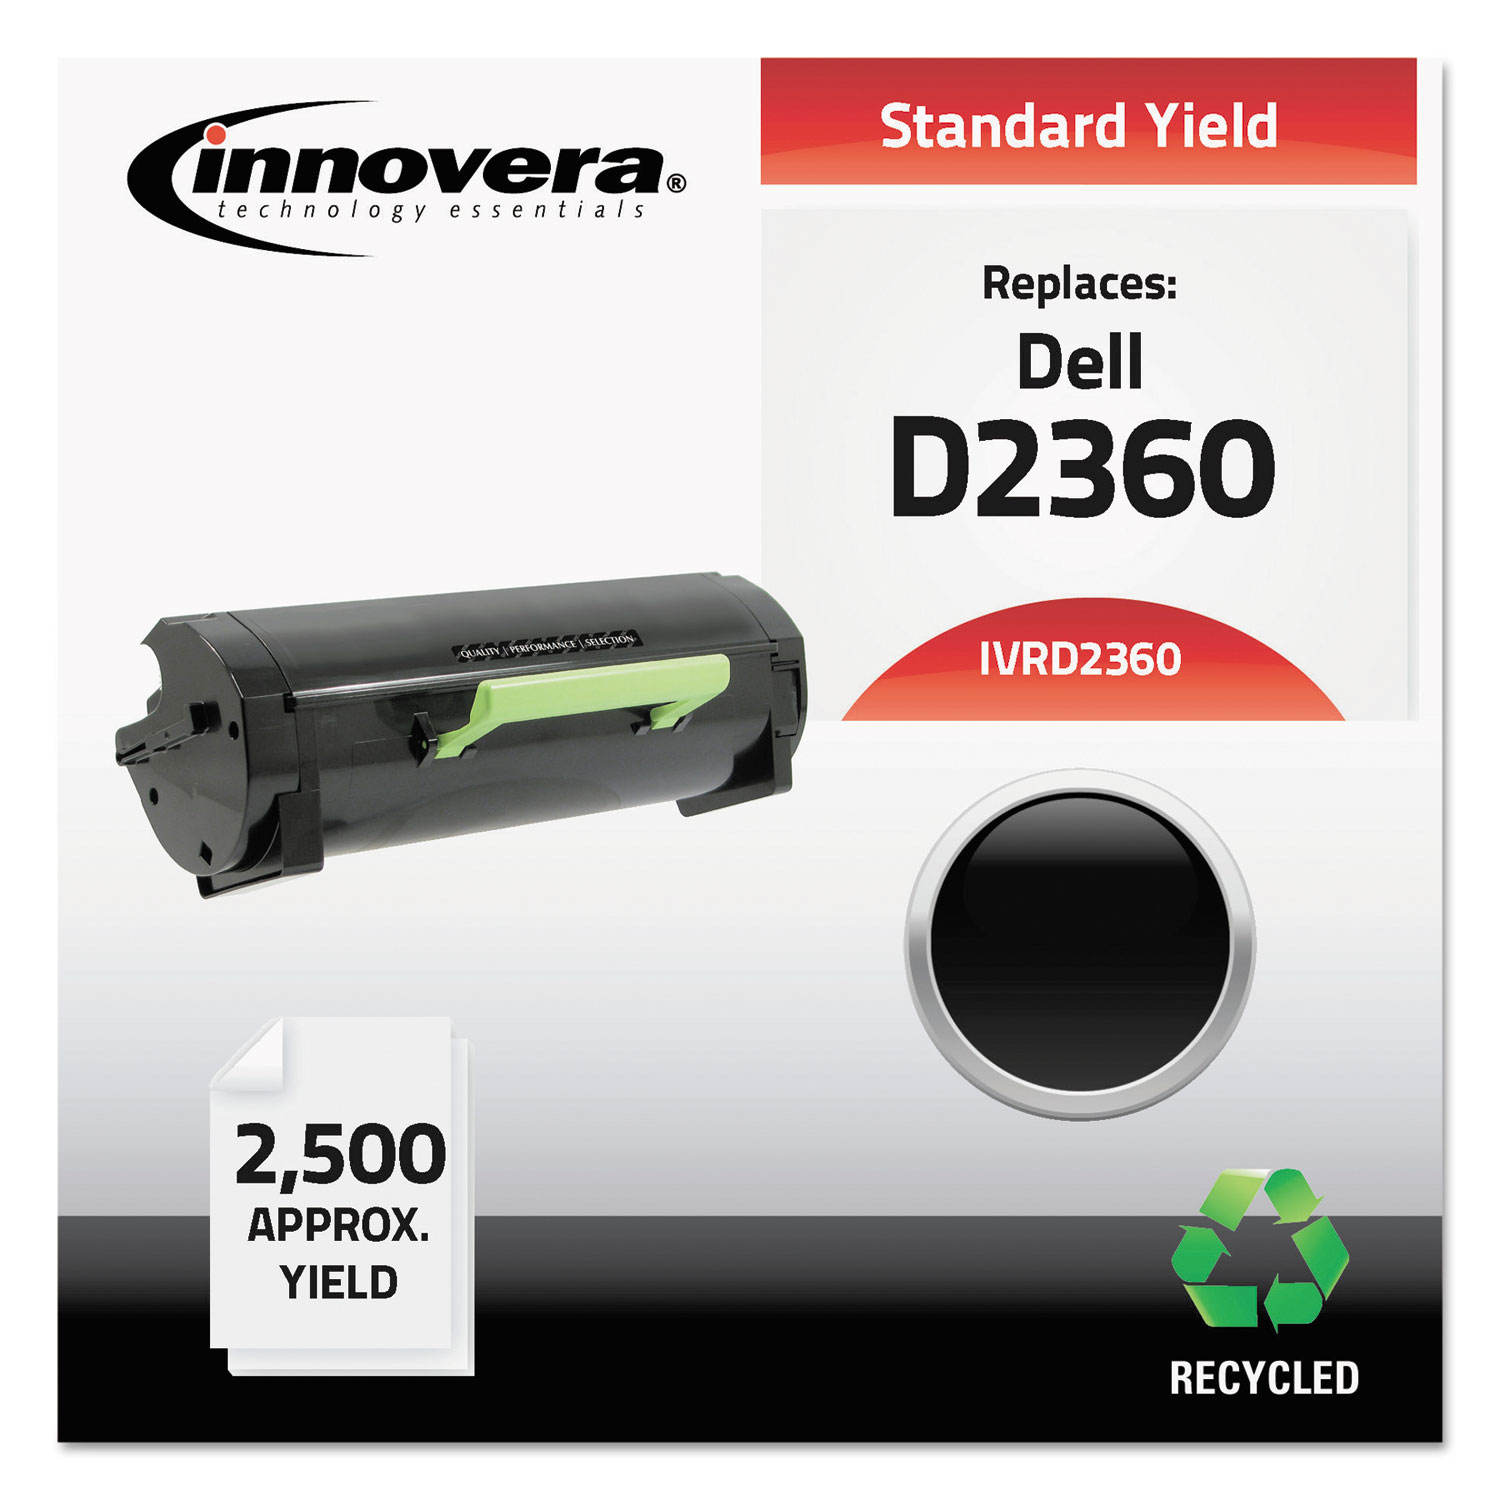 Remanufactured 3319803 (B2360) Toner, 2500 Page-Yield, Black